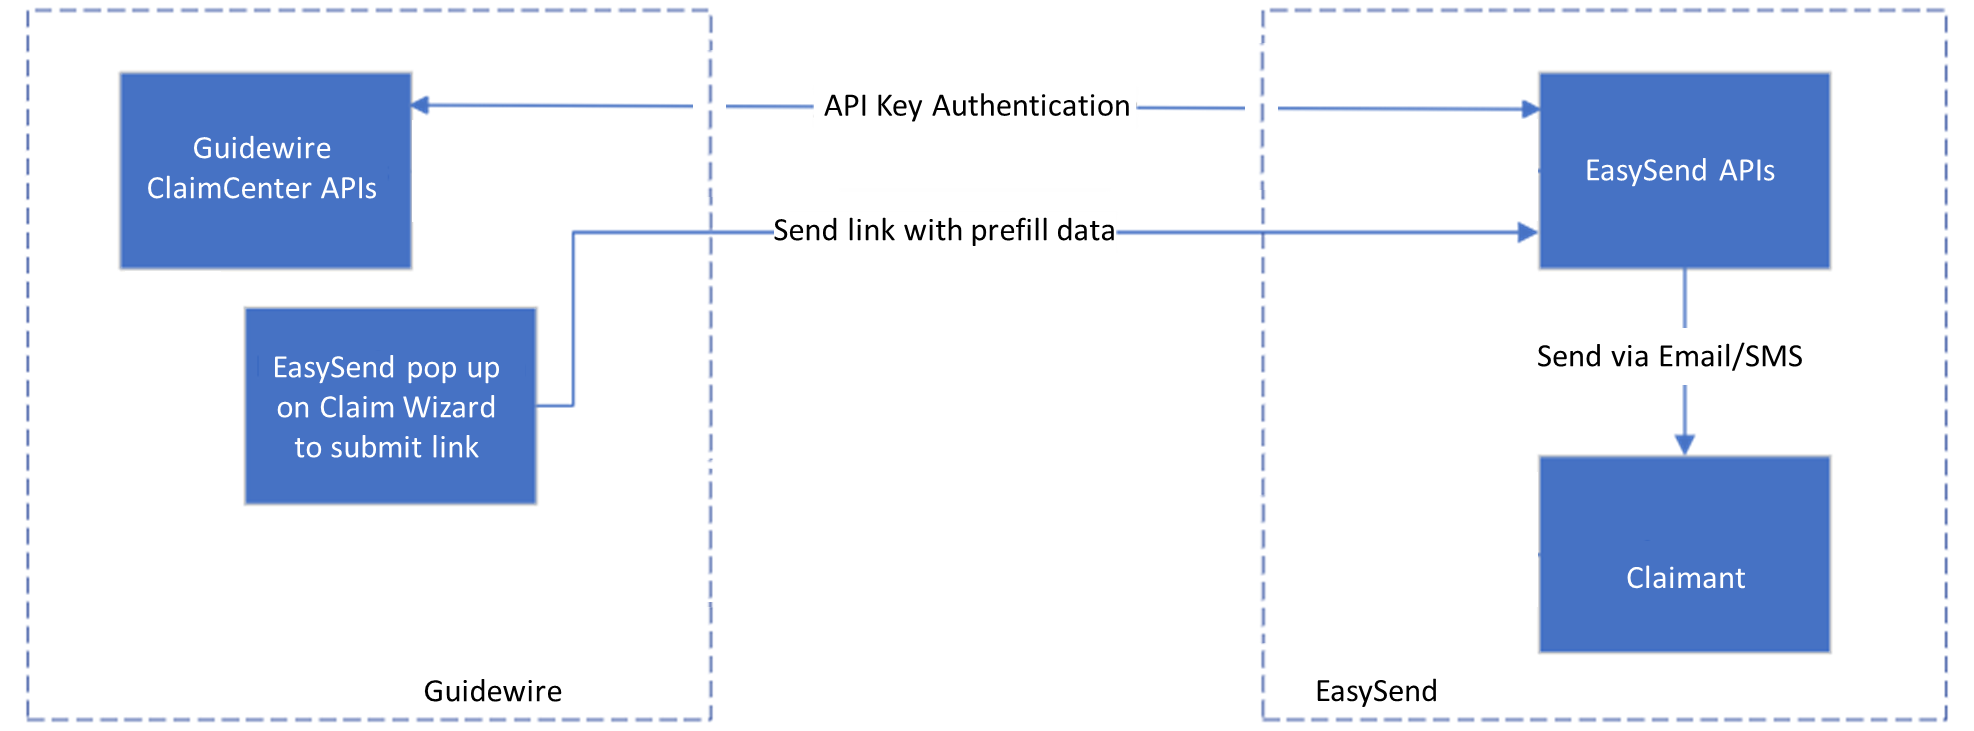 The image describes Stages 1 +2 of sending EasySend Links with Pre-filled Information